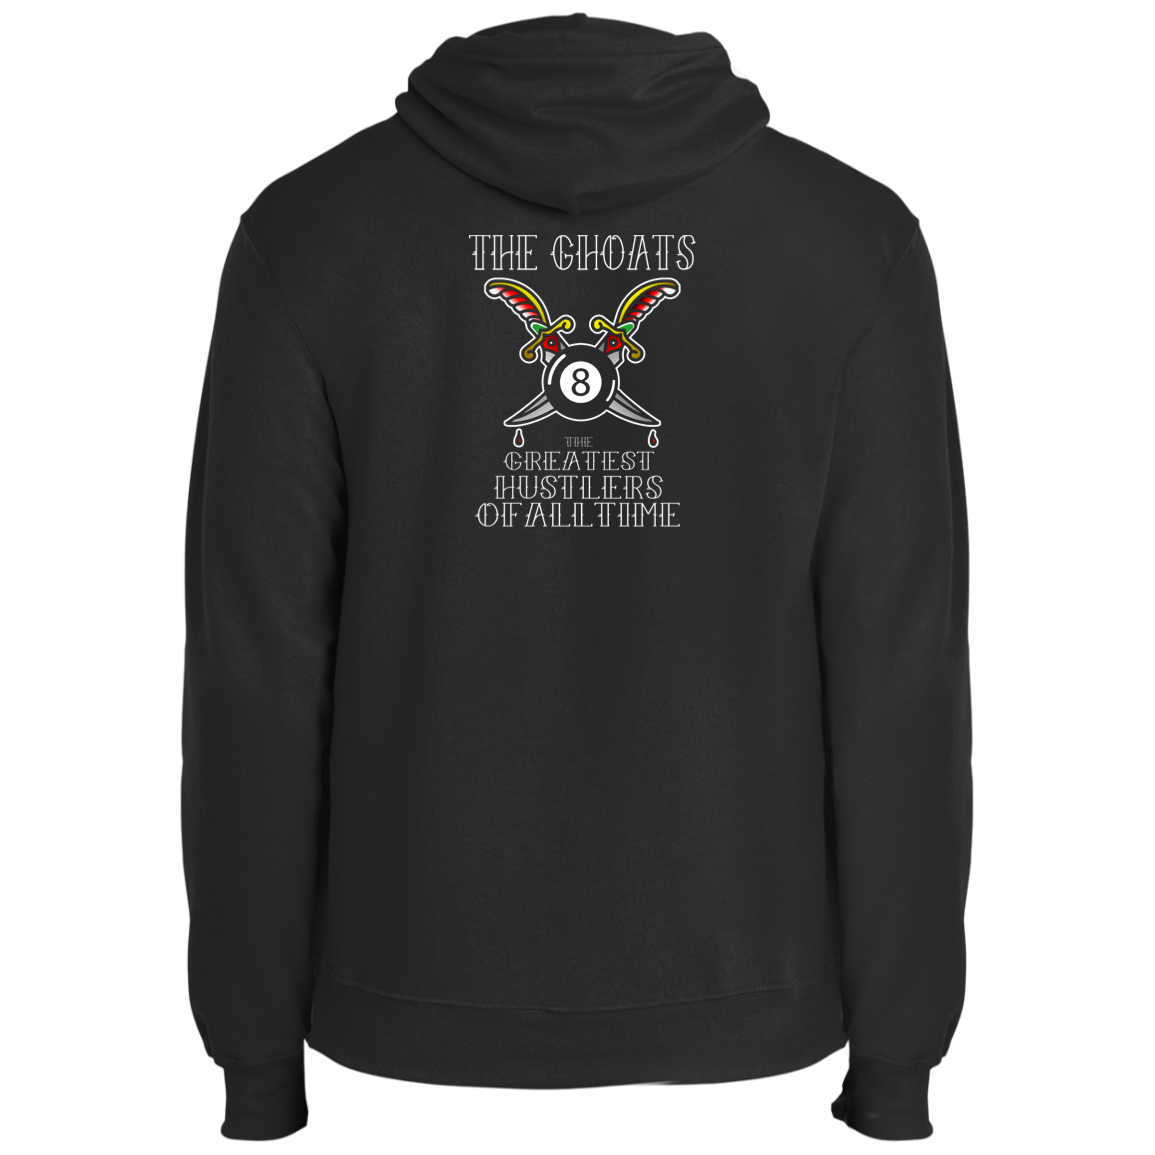 The GHOATS Custom Design #36. Stay Ready Won't Have to Get Ready. Tattoo Style. Ver. 1/2. Fleece Pullover Hoodie